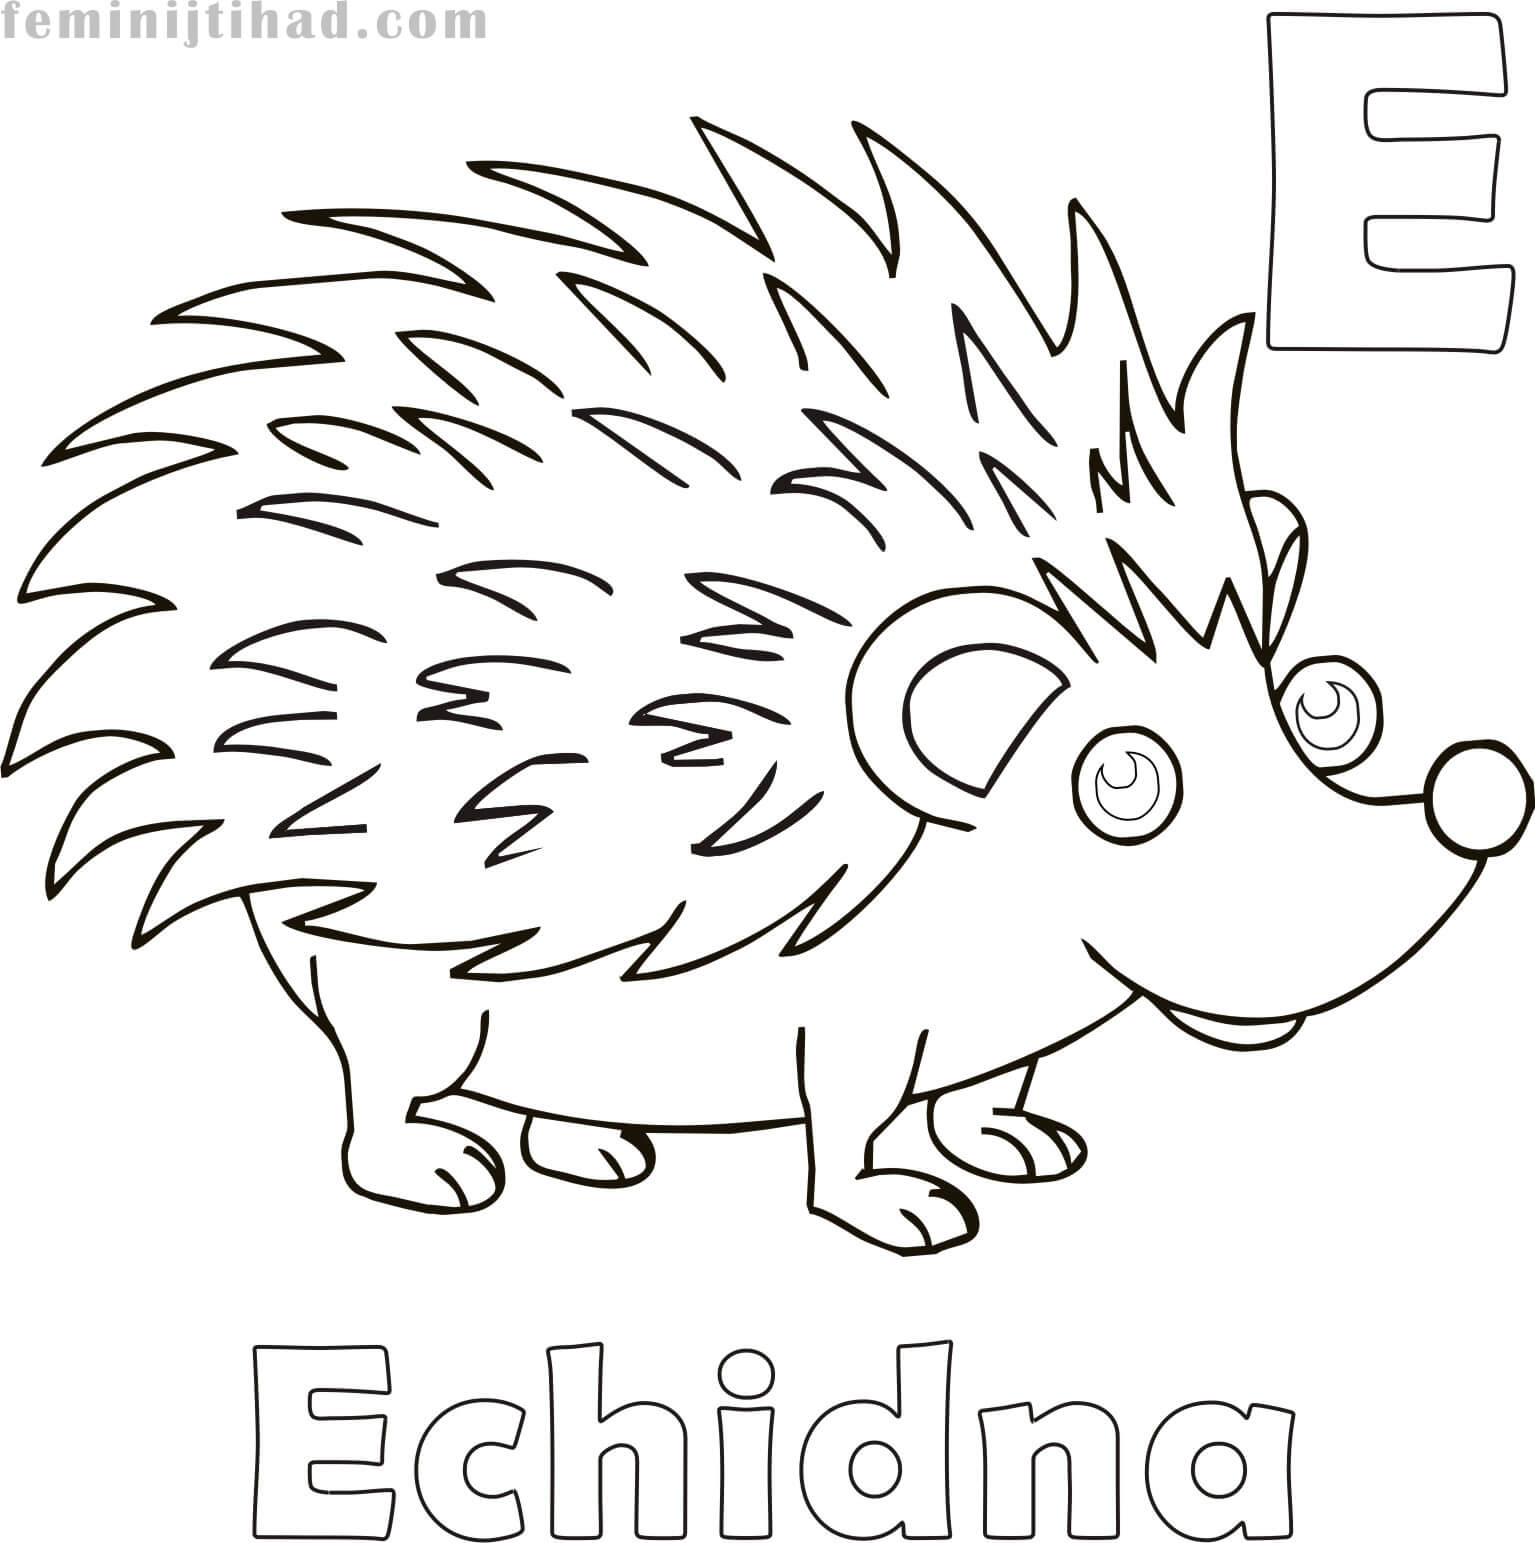 Free Echidna Coloring Page to Print